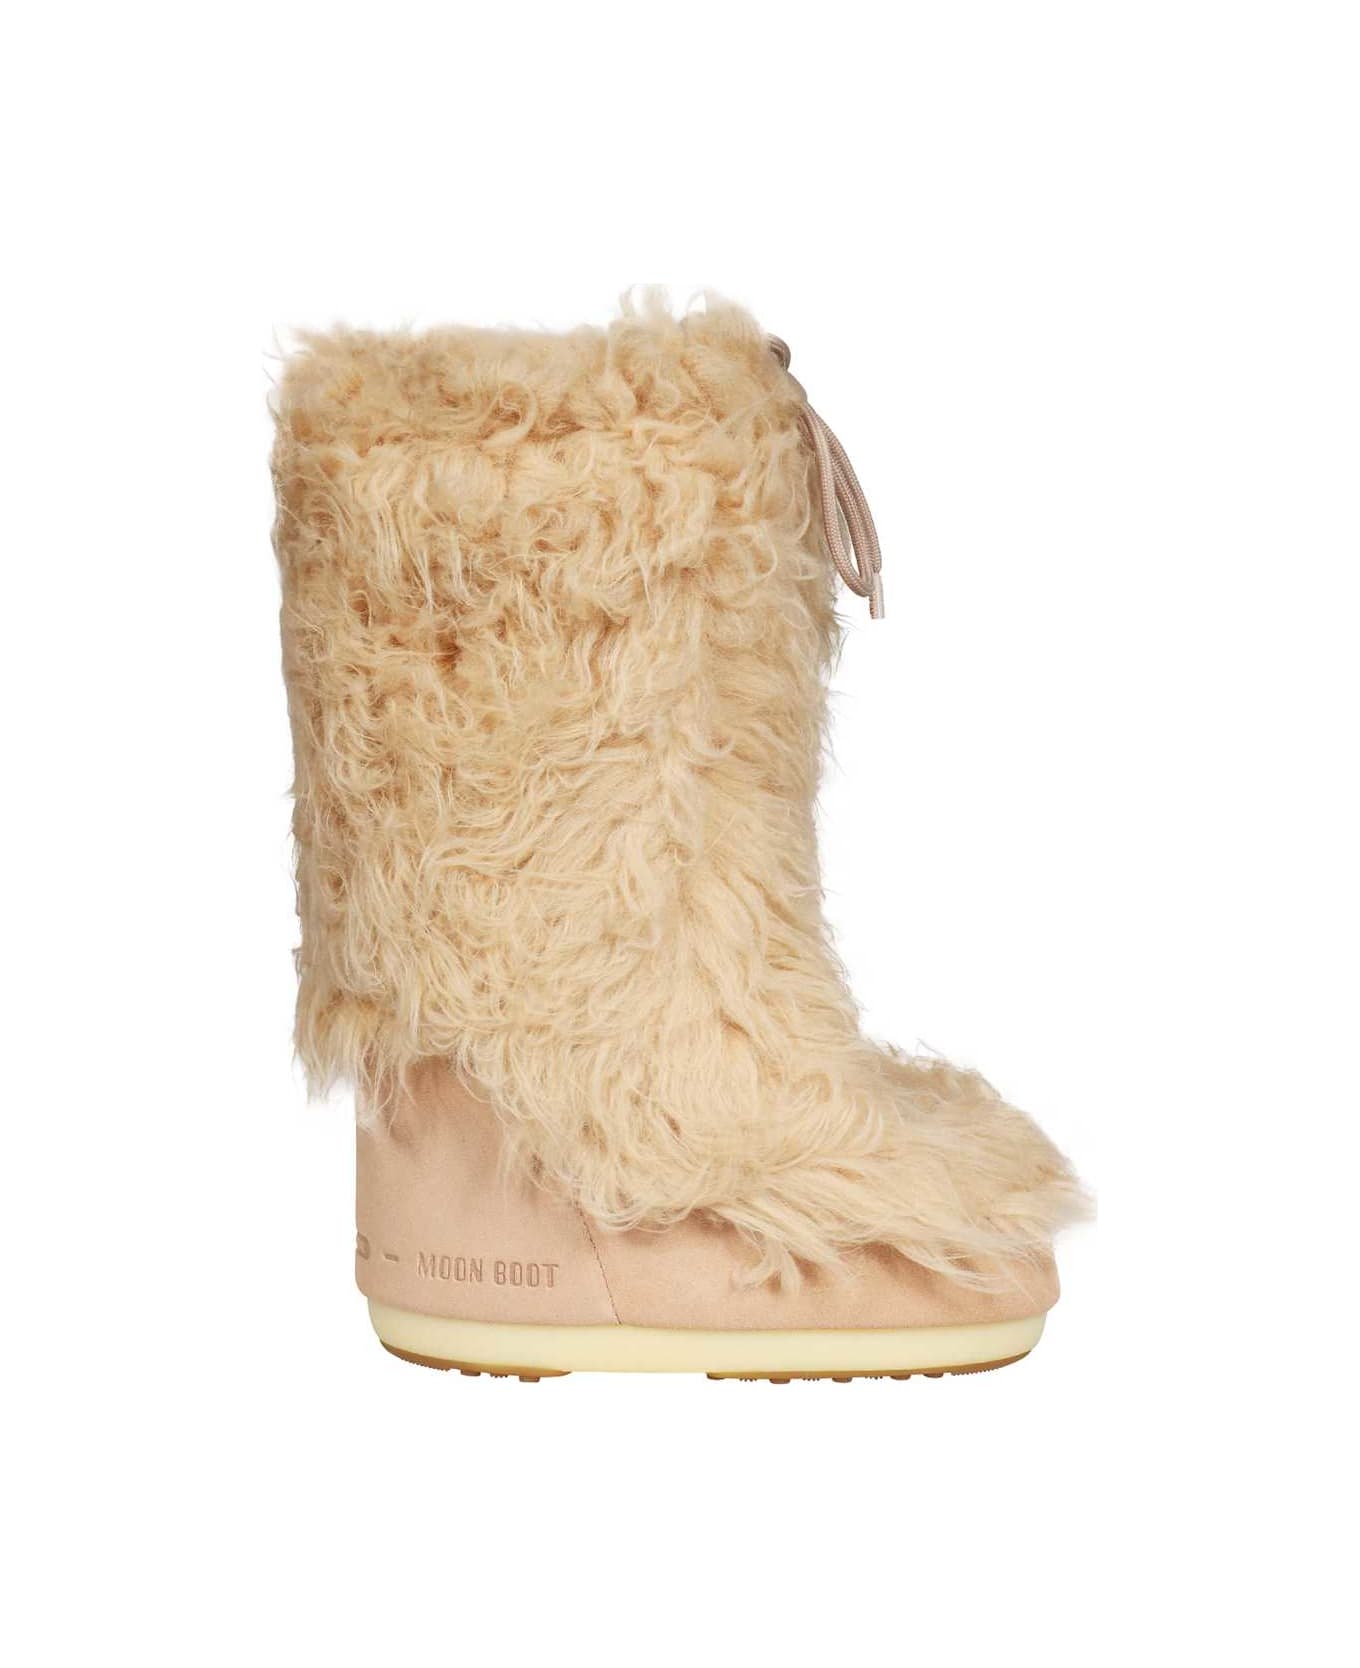 Moon Boot Snow Boots - Pale pink